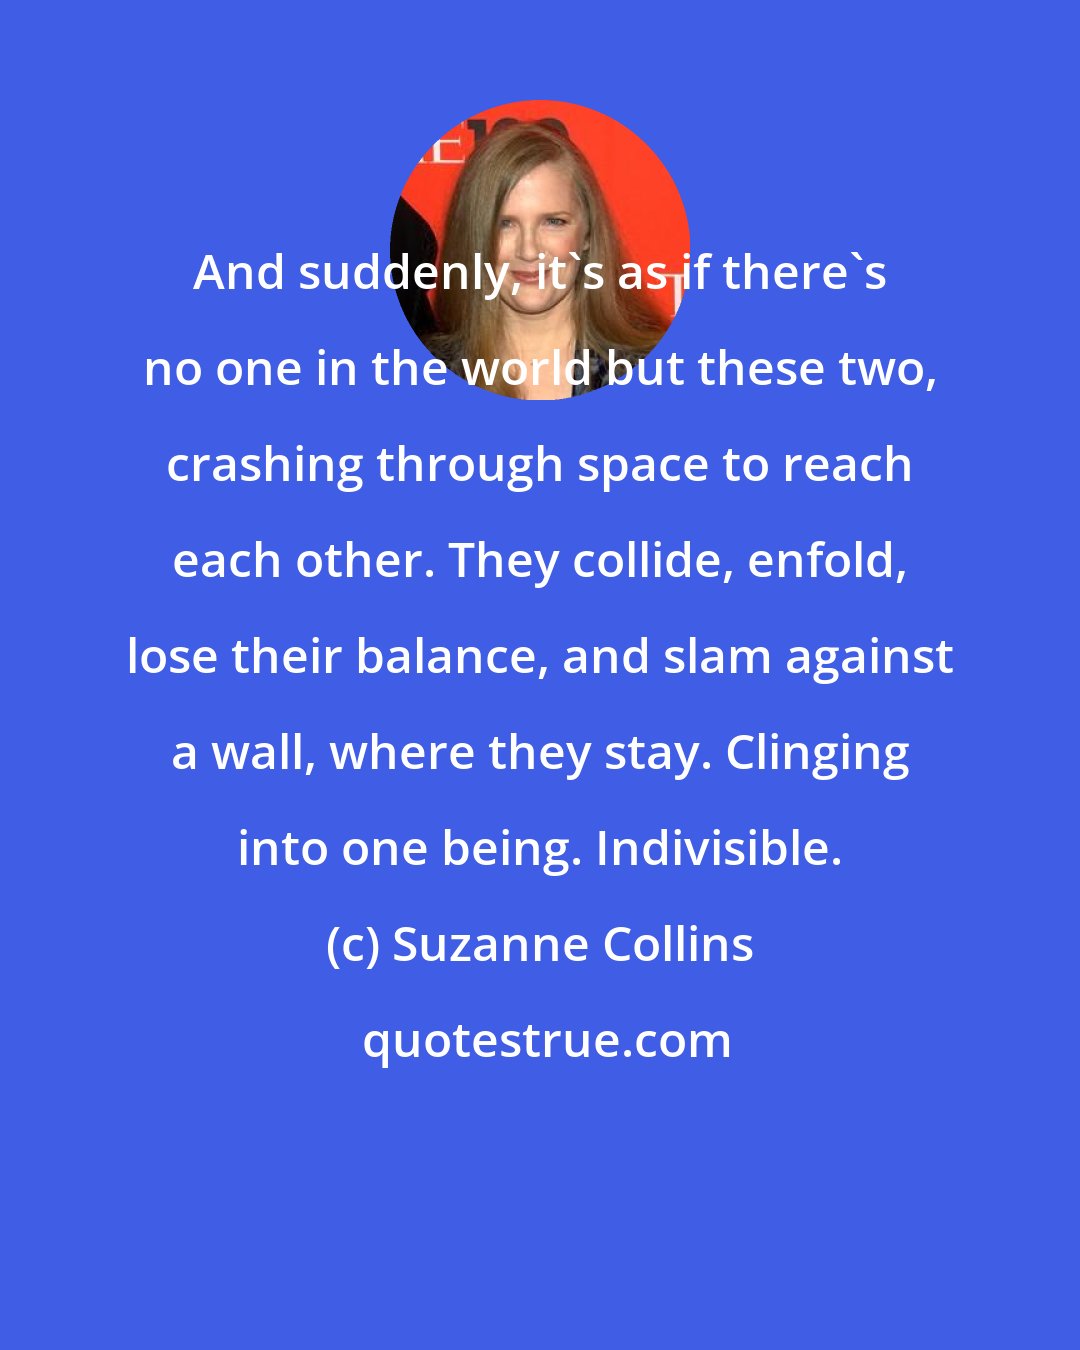 Suzanne Collins: And suddenly, it's as if there's no one in the world but these two, crashing through space to reach each other. They collide, enfold, lose their balance, and slam against a wall, where they stay. Clinging into one being. Indivisible.